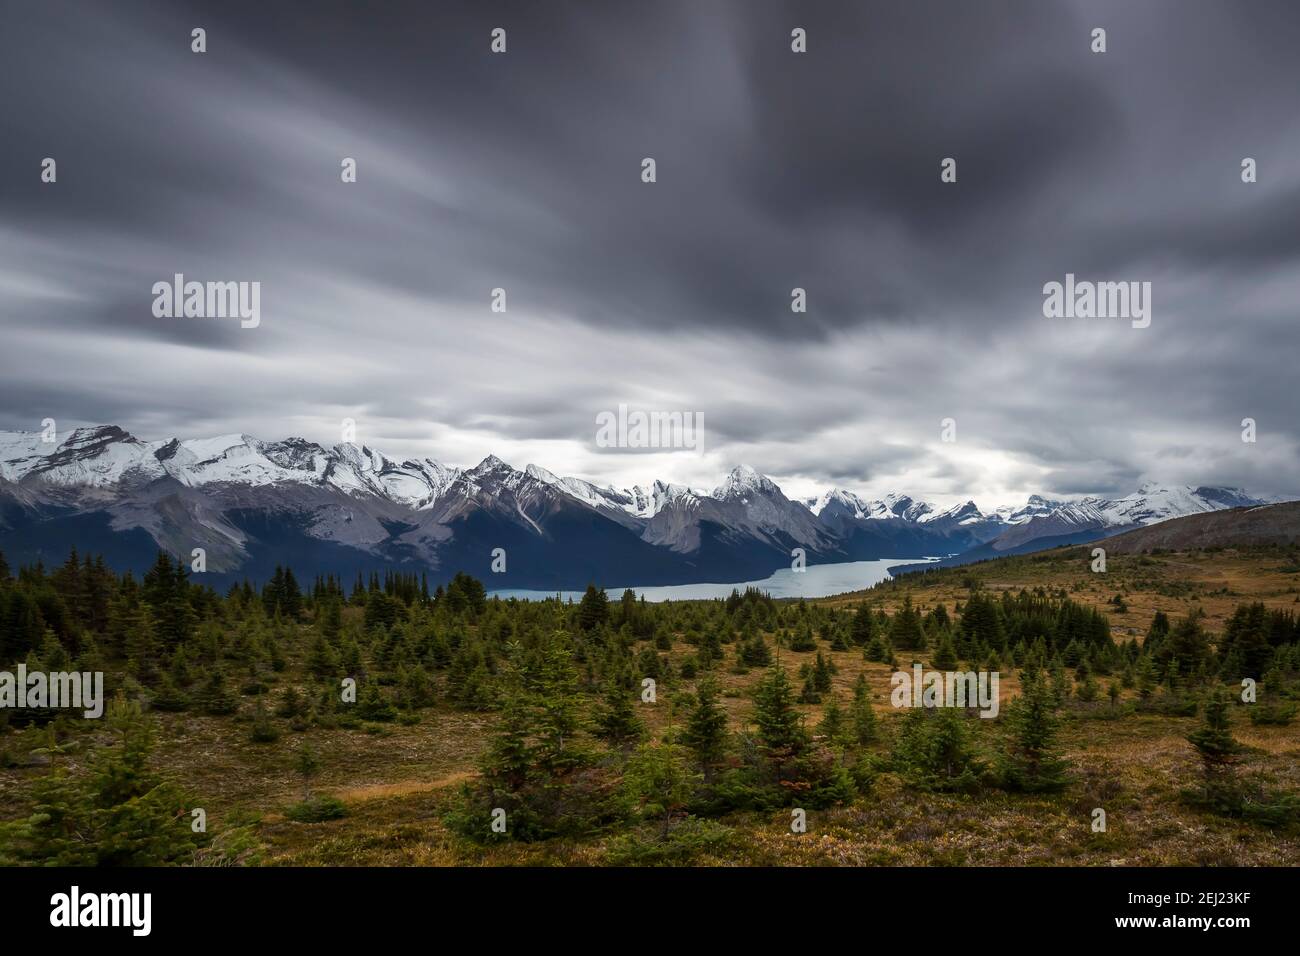 Long exposure of a Canadian Rockies landscape with a lake next to mountains with snow during autumn under a looming overcast sky with fast dark clouds Stock Photo